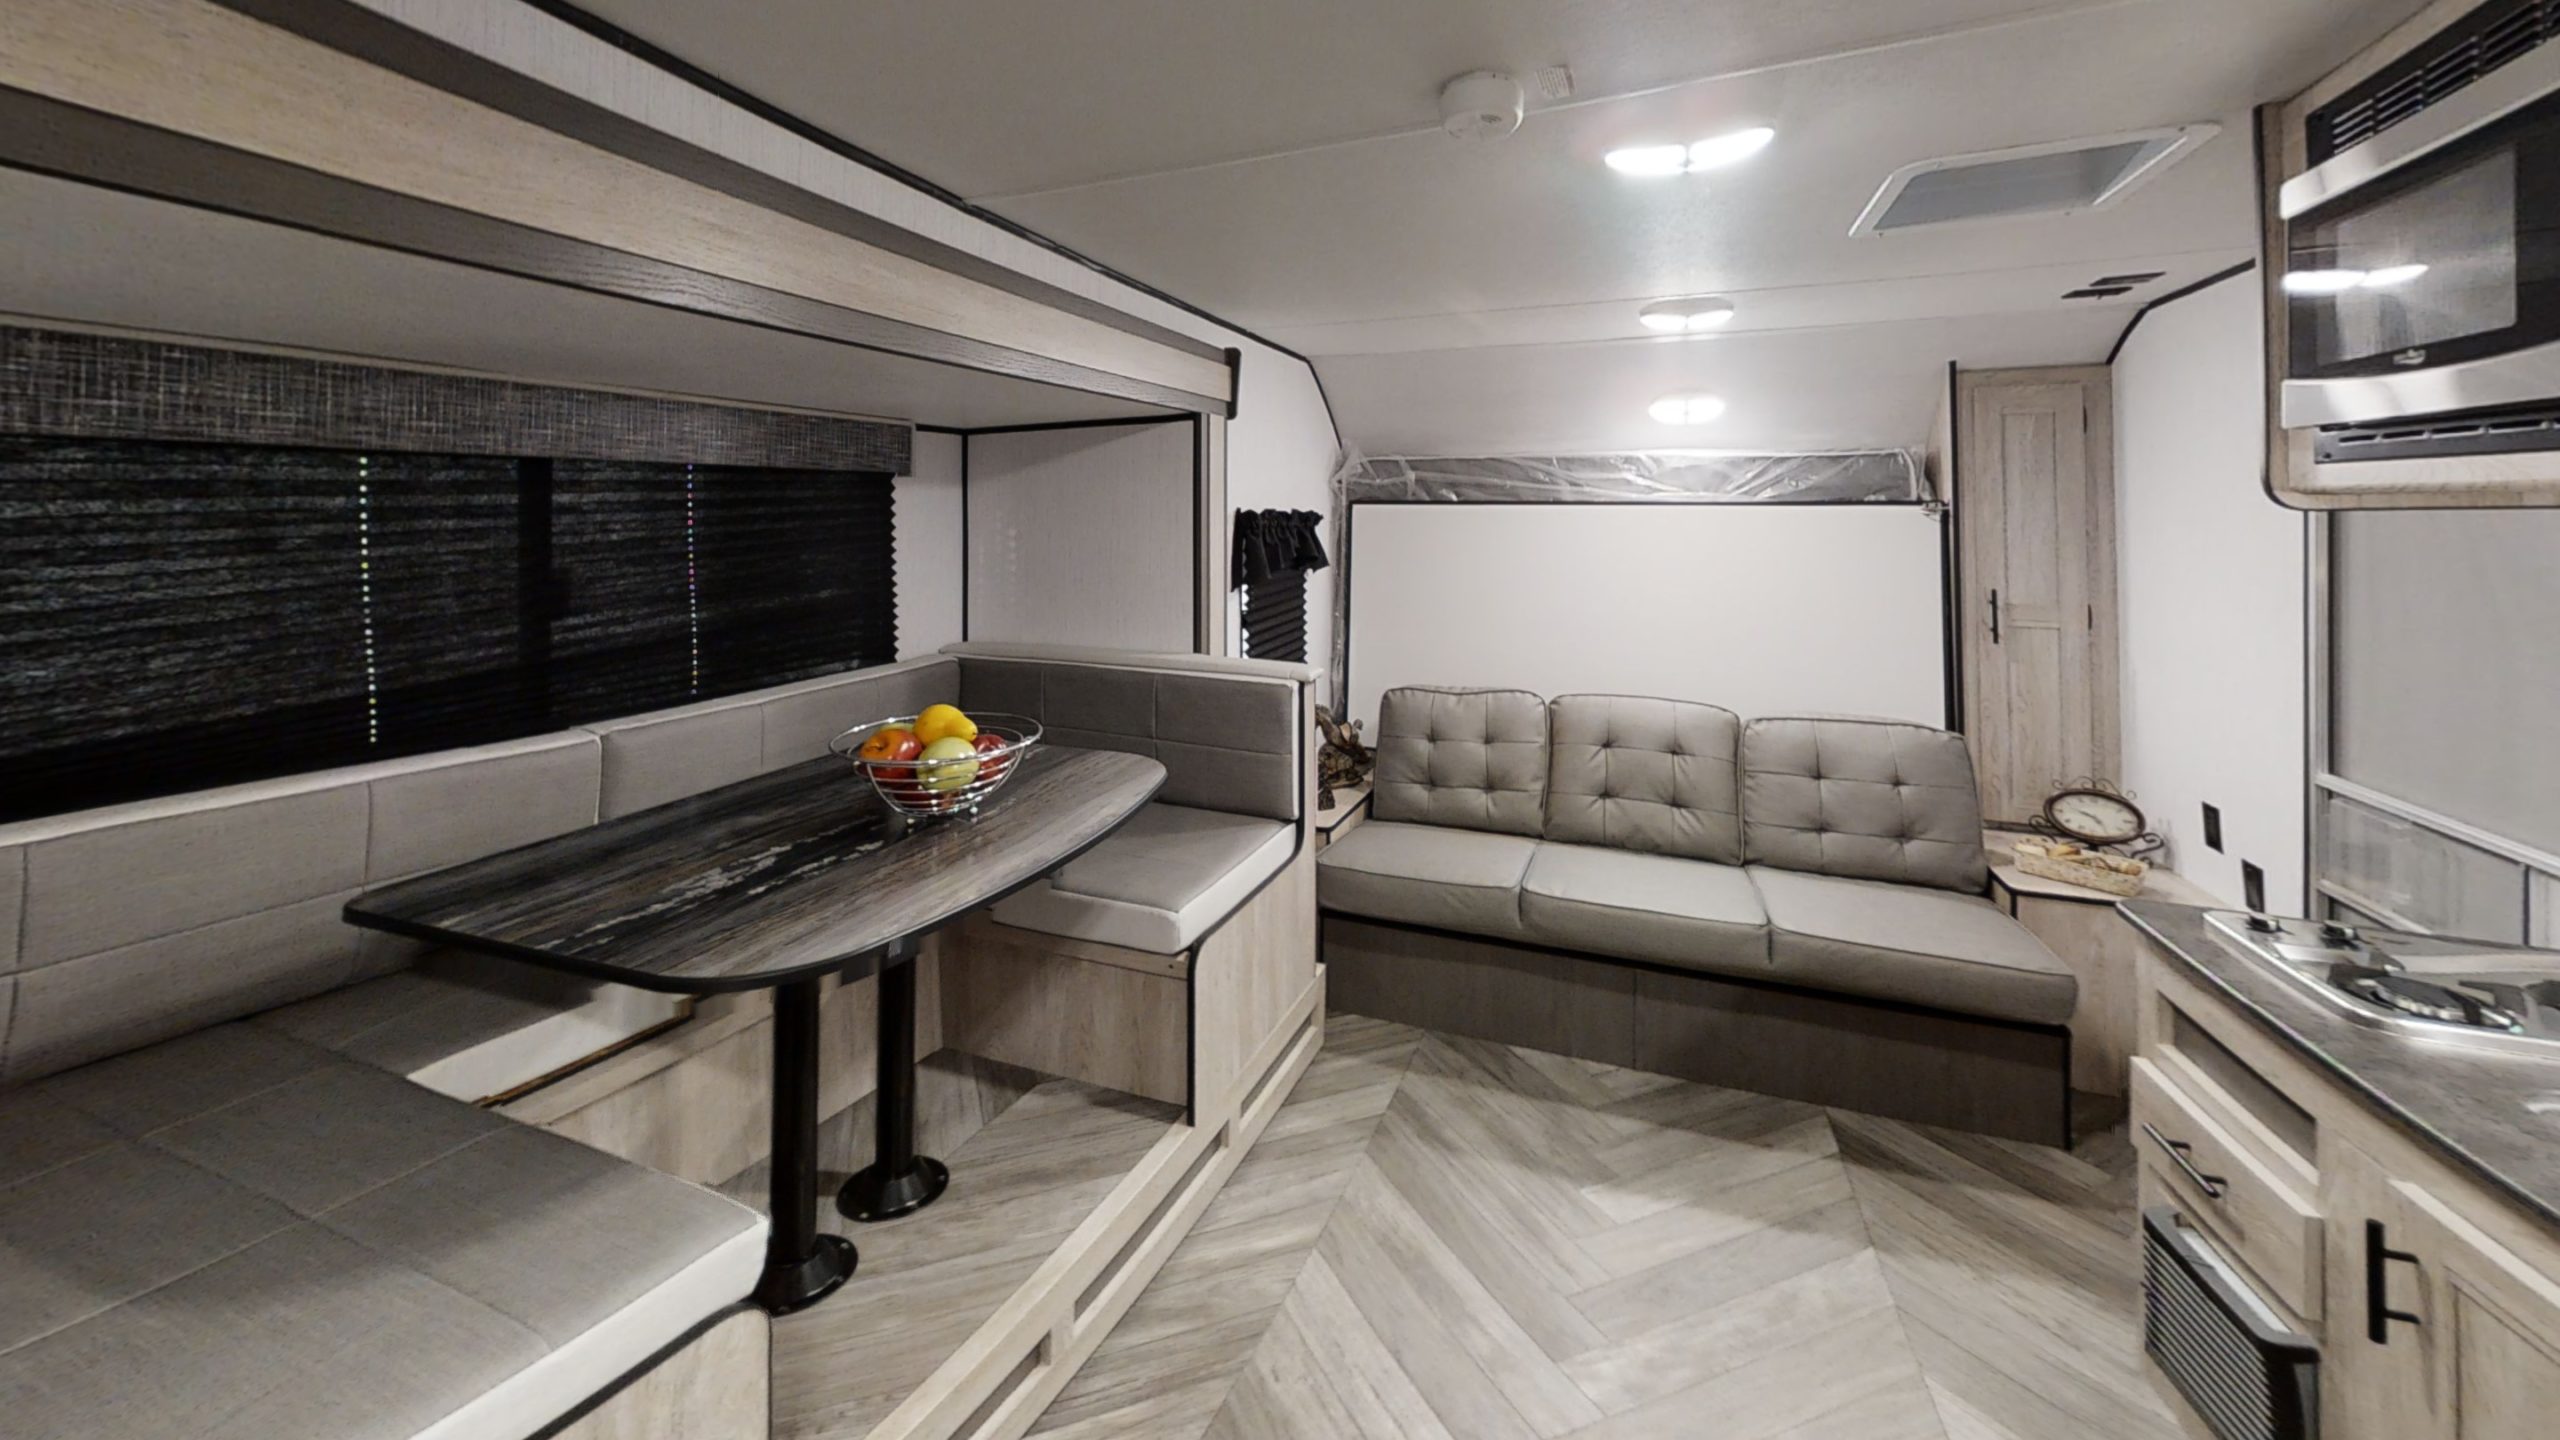 2023 HEARTLAND Prowler - 181 BHX for sale in the Pompano Beach, FL area. Get the best drive out price on 2023 HEARTLAND Prowler - 181 BHX and compare.